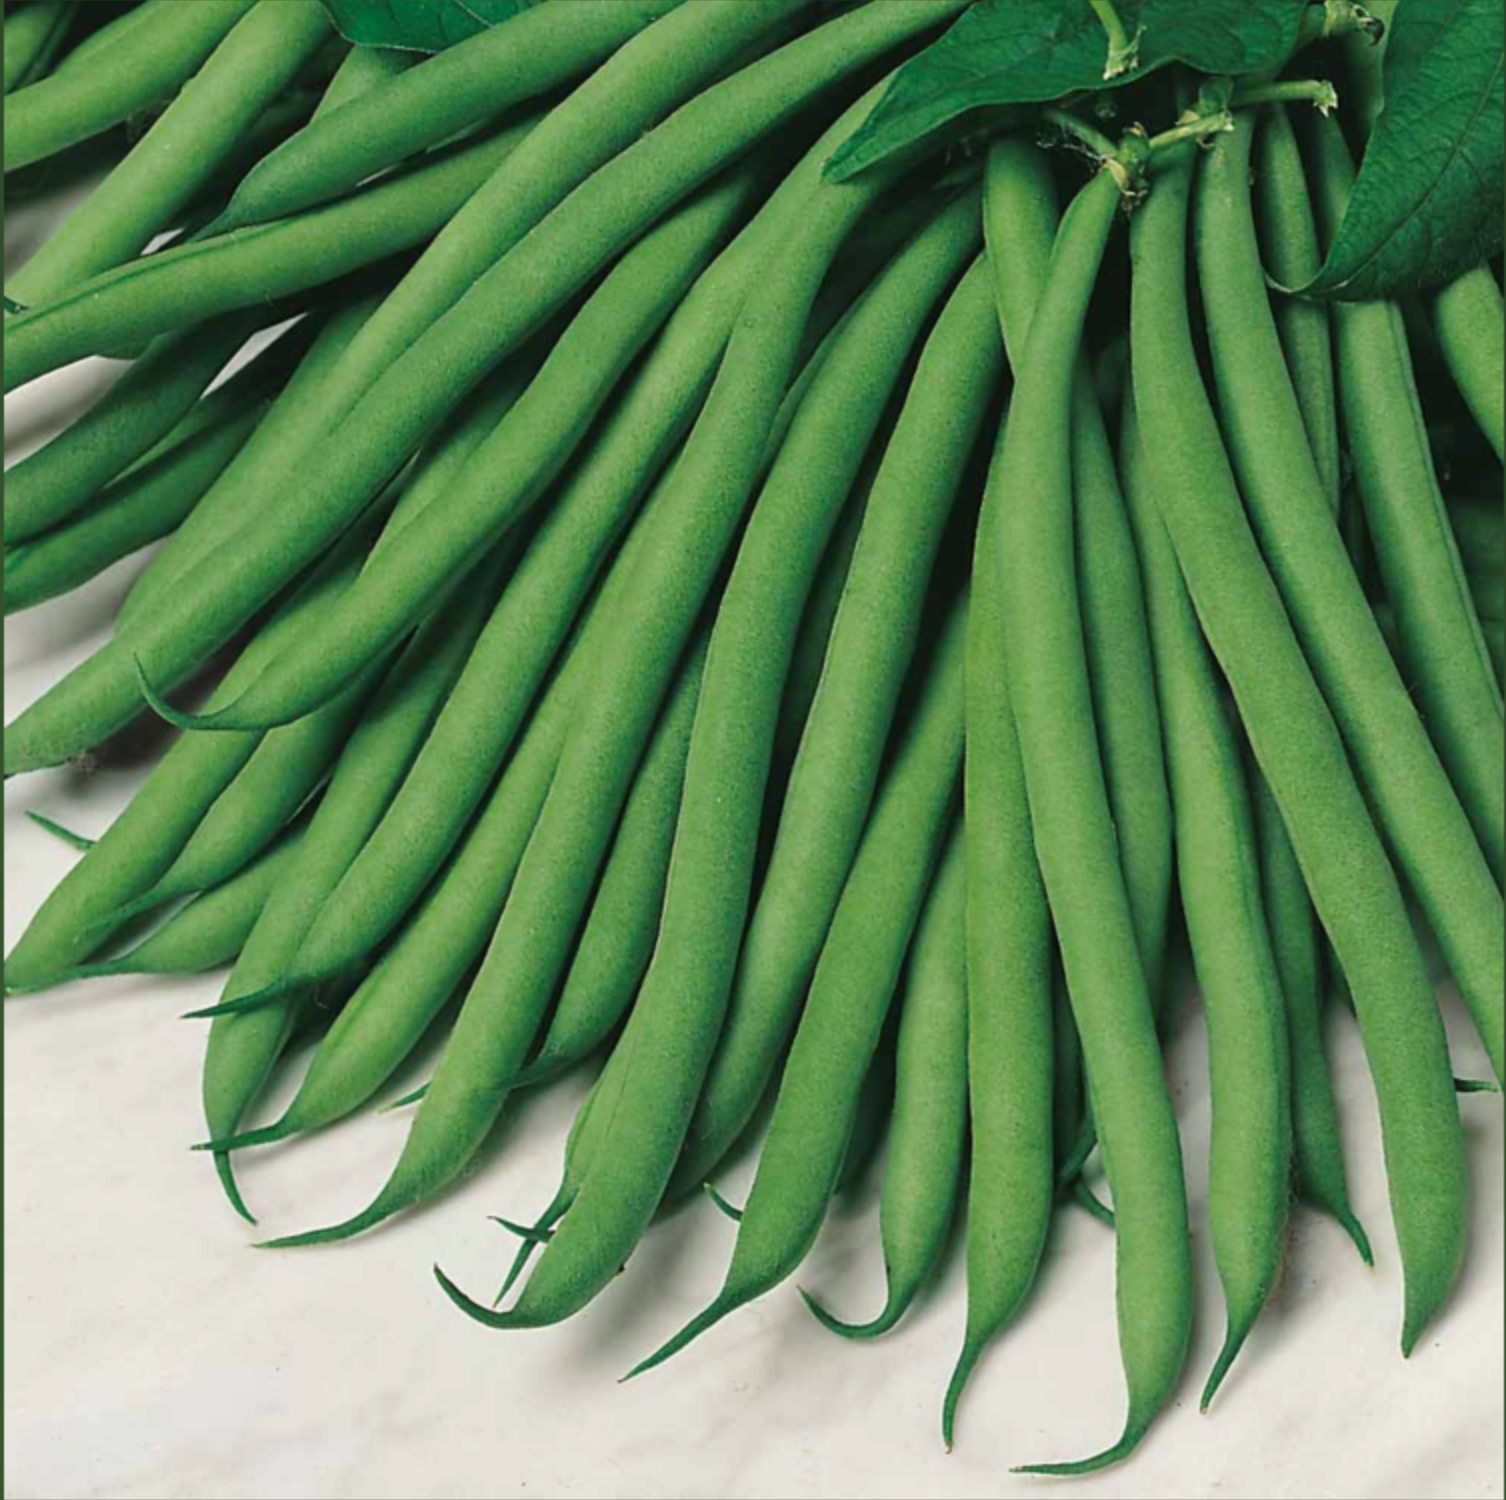 Suttons French Bean Seeds - 4 Varieties